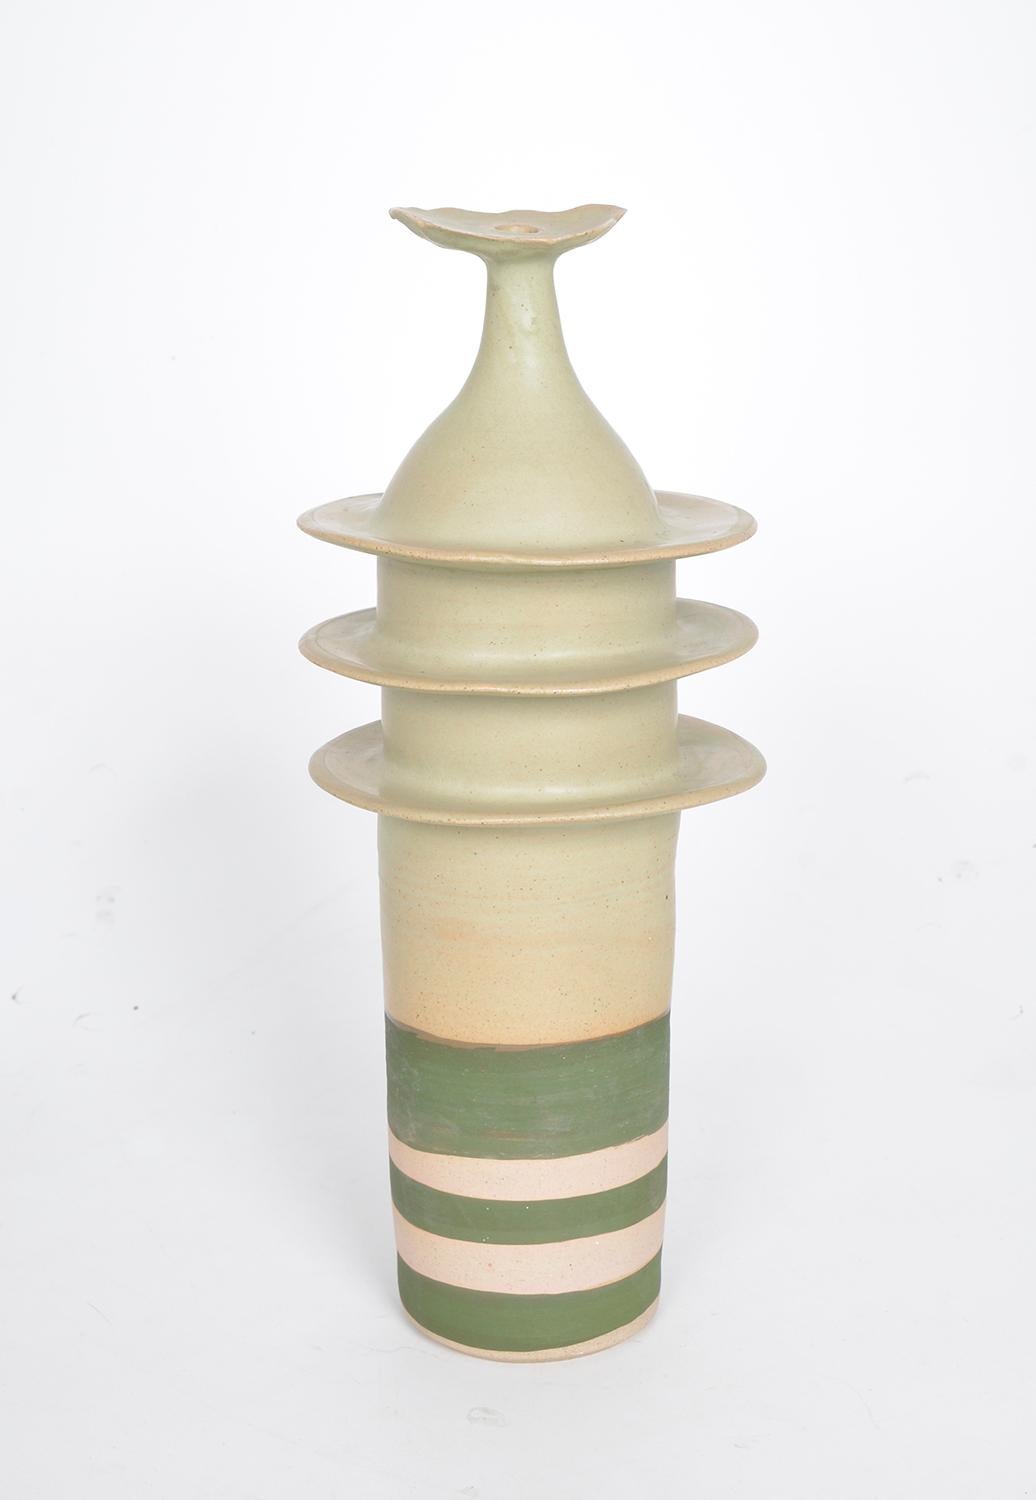 A wonderful three hooped ‘Pagoda Pot’ by Alan Ashpool, tiered forms made from a mixture of thrown and slipcast sections joined together, in an ecru / pale green colourway, with three matt green slip stripes. In very good condition with no chips or